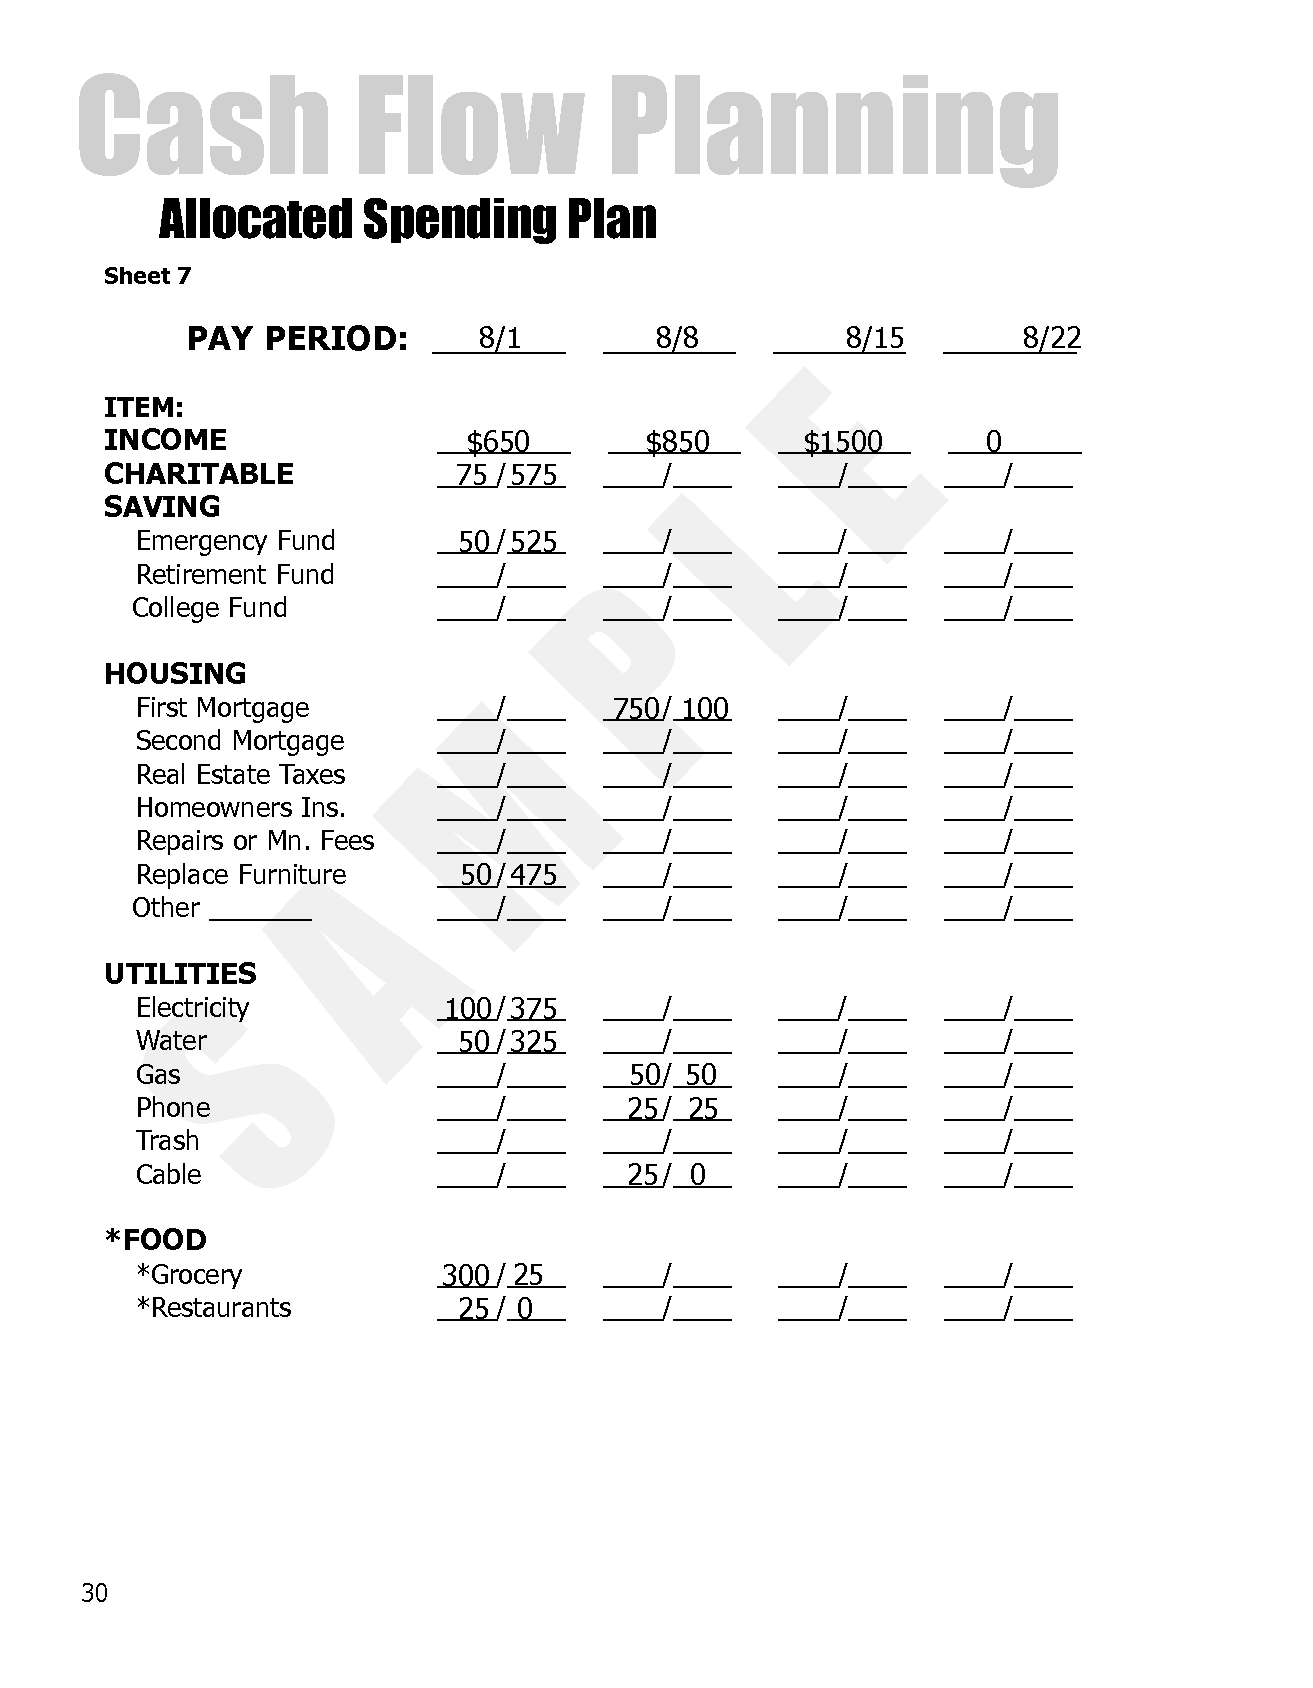 Dave Ramsey Allocated Spending Plan Budget